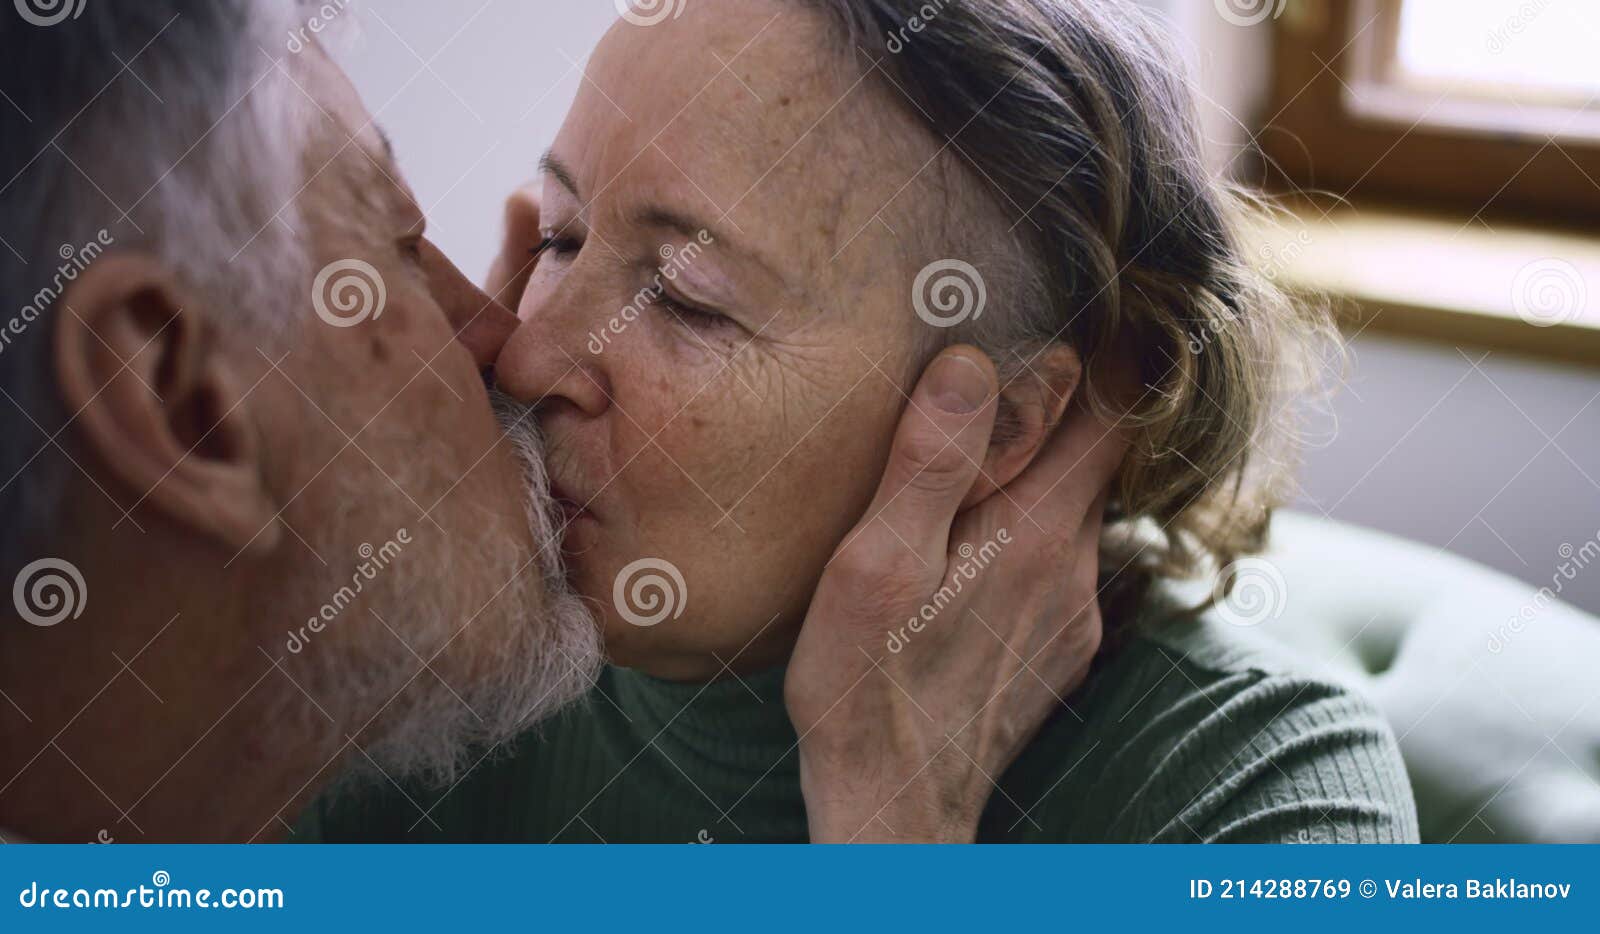 Portraits, an Elderly Man Kisses His Old Wife on the Lips